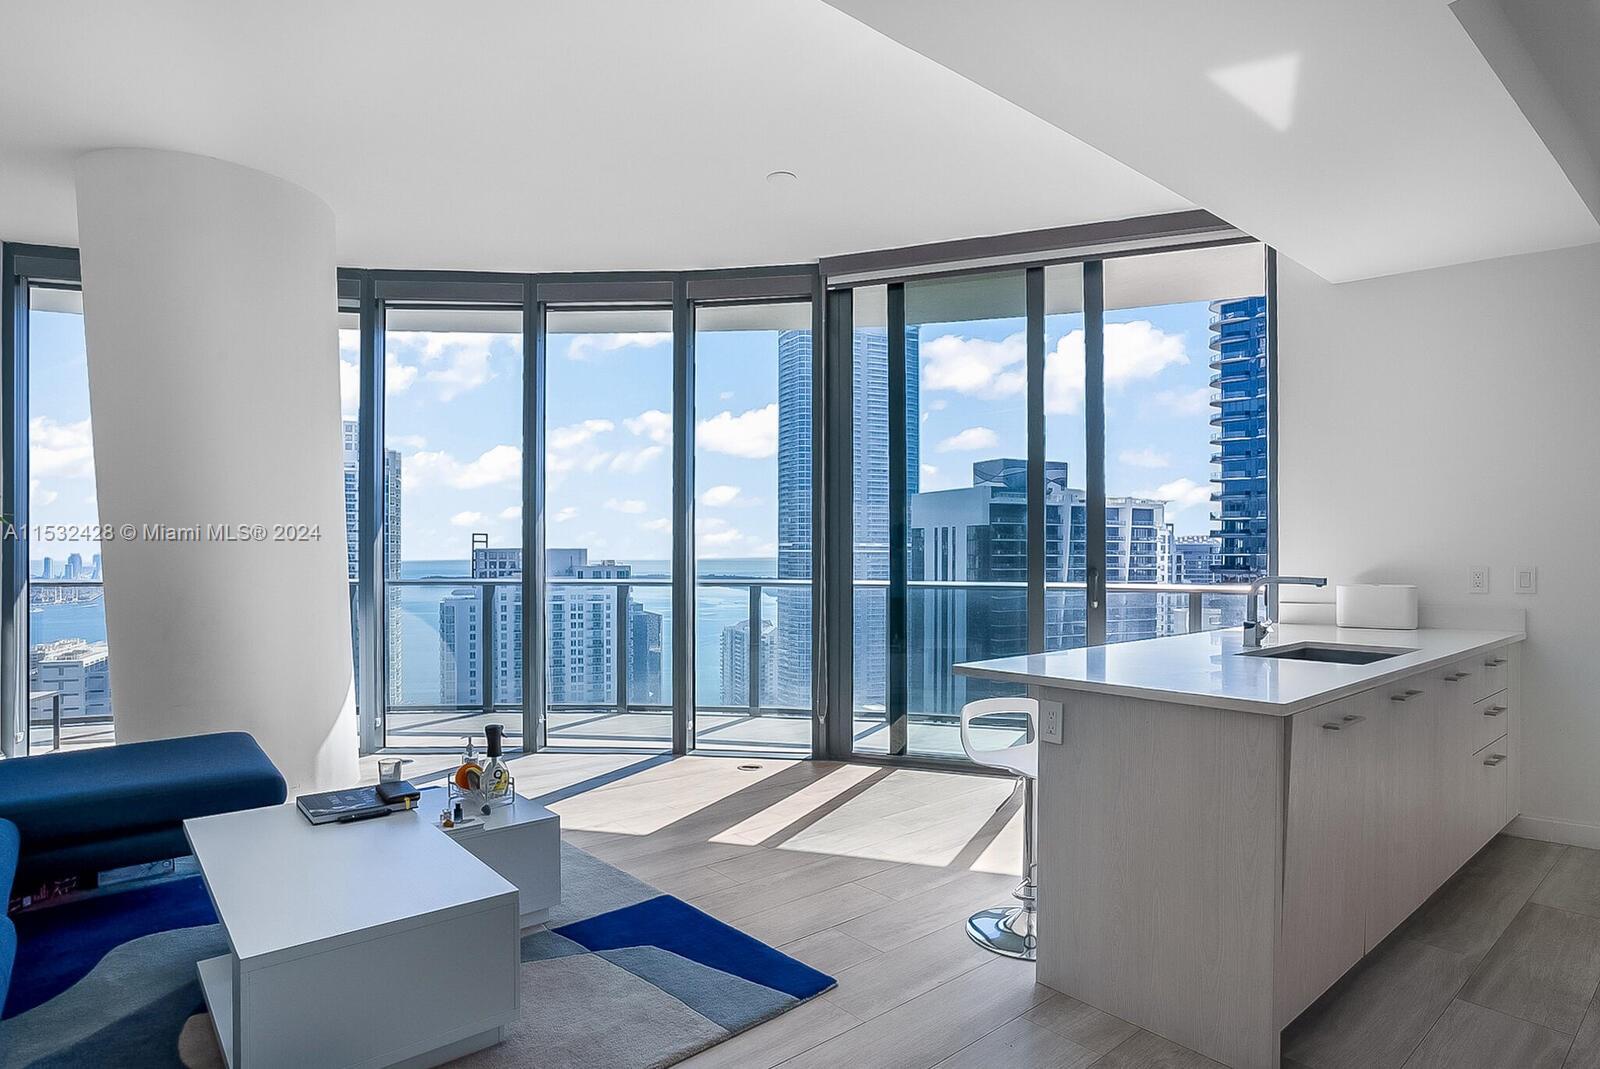 Absolutely stunning 3bed 3bath corner unit on the 44th fl of Brickell Heights Luxury High Rise. Undoubtedly the best line in the building with direct South East water and skyline views.  The interior features include Italian cabinetry, imported tile floor, floor to ceiling impact windows, custom walk-in closets, stainless steel appliances, shades in every room, and much more. The expansive wraparound balcony overlooking Brickell's skyline is priceless.  This luxury building featuring high end amenities, roof top pool, fitness center, home theatre, kids playroom, spa, and much more is centrally located within minutes of everything Brickell has to offer.